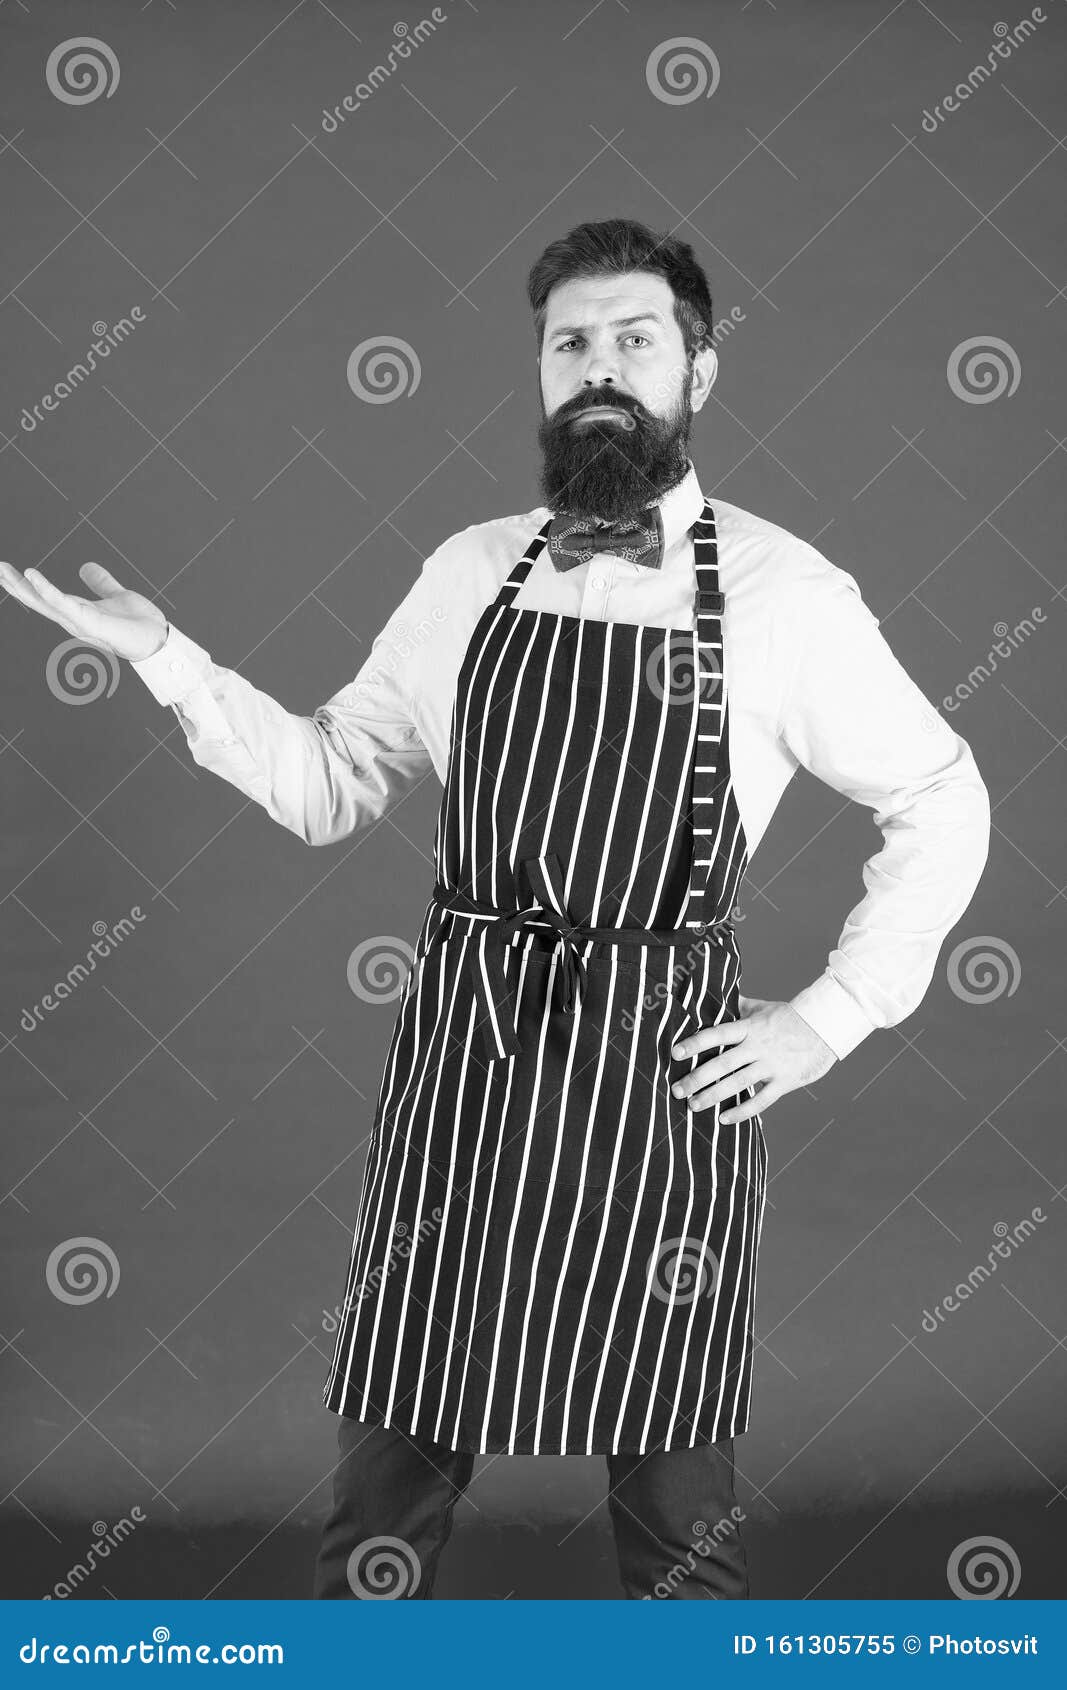 Presenting Your Product. Confident Man Worker or Waiter. Grill Worker  Wearing Barbecue Apron Stock Image - Image of beard, profession: 161305755